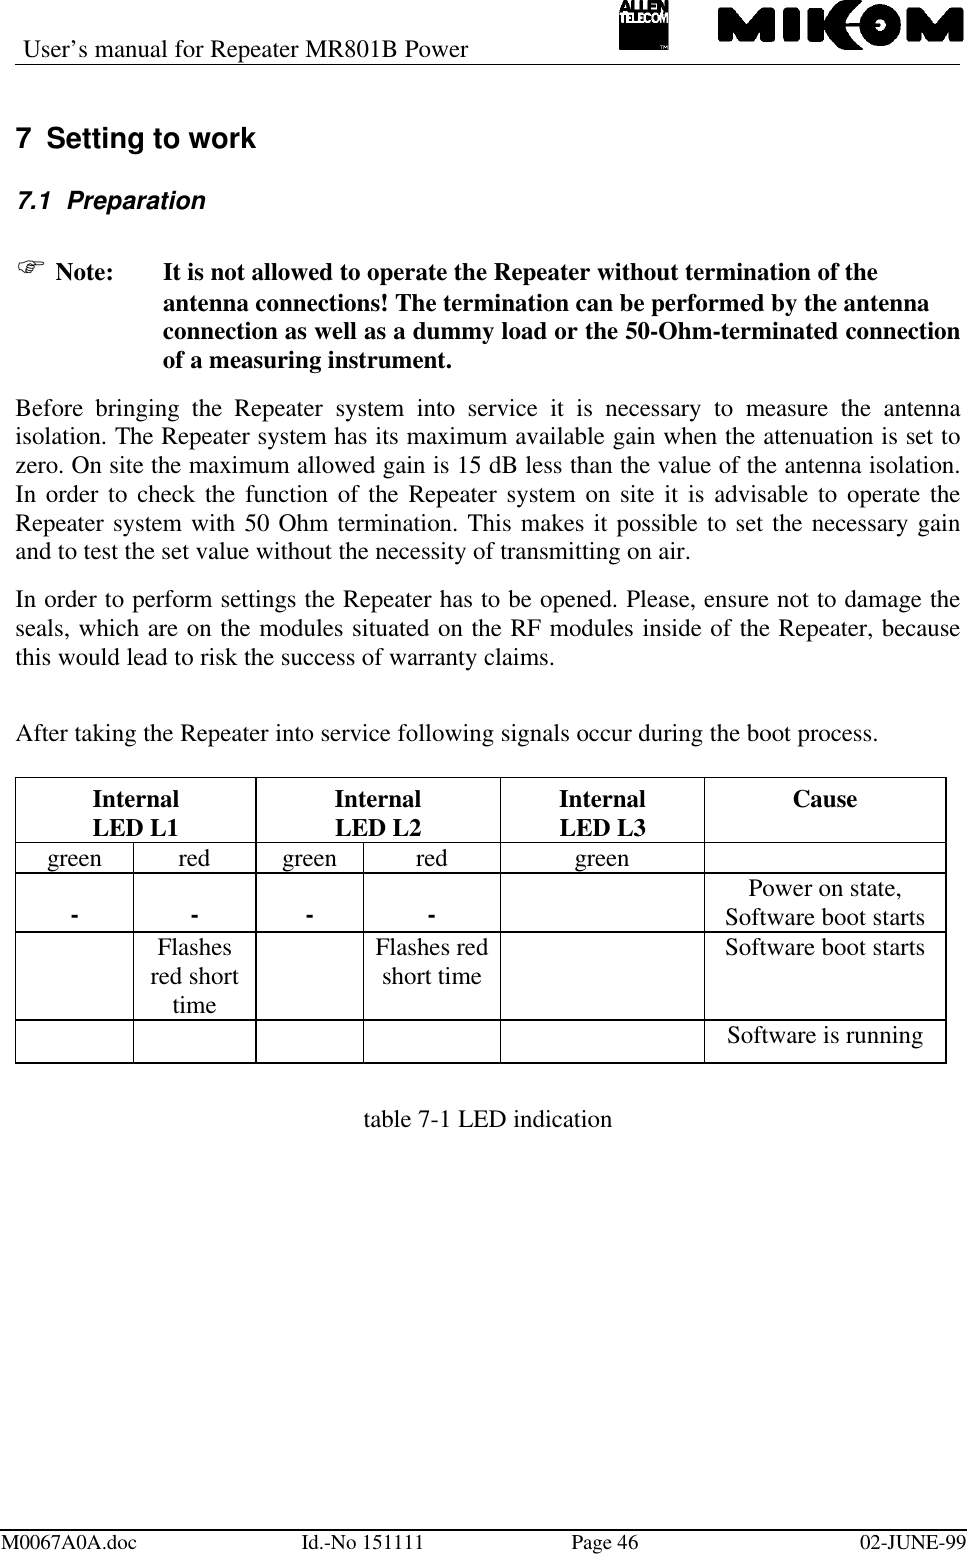 User’s manual for Repeater MR801B PowerM0067A0A.doc Id.-No 151111 Page 46 02-JUNE-997 Setting to work7.1 PreparationF Note: It is not allowed to operate the Repeater without termination of the antenna connections! The termination can be performed by the antenna connection as well as a dummy load or the 50-Ohm-terminated connectionof a measuring instrument.Before bringing the Repeater system into service it is necessary to measure the antennaisolation. The Repeater system has its maximum available gain when the attenuation is set tozero. On site the maximum allowed gain is 15 dB less than the value of the antenna isolation.In order to check the function of the Repeater system on site it is advisable to operate theRepeater system with 50 Ohm termination. This makes it possible to set the necessary gainand to test the set value without the necessity of transmitting on air.In order to perform settings the Repeater has to be opened. Please, ensure not to damage theseals, which are on the modules situated on the RF modules inside of the Repeater, becausethis would lead to risk the success of warranty claims.After taking the Repeater into service following signals occur during the boot process.InternalLED L1 InternalLED L2 InternalLED L3 Causegreen red green red green- - - - ll Power on state,Software boot startsll Flashesred shorttimell Flashes redshort time ll Software boot startsll ll ll Software is runningtable 7-1 LED indication